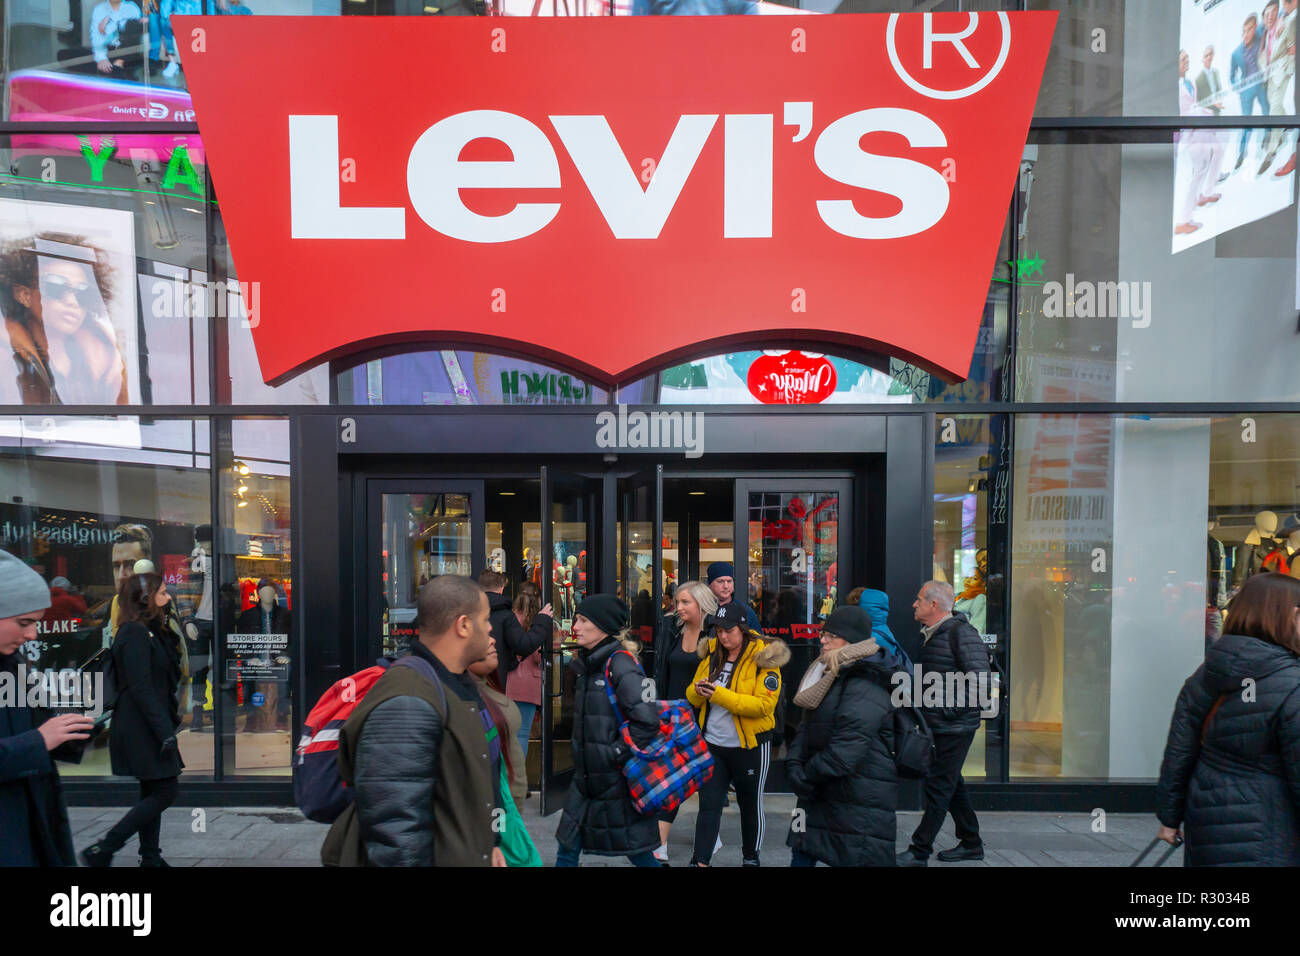 levis nottingham opening times